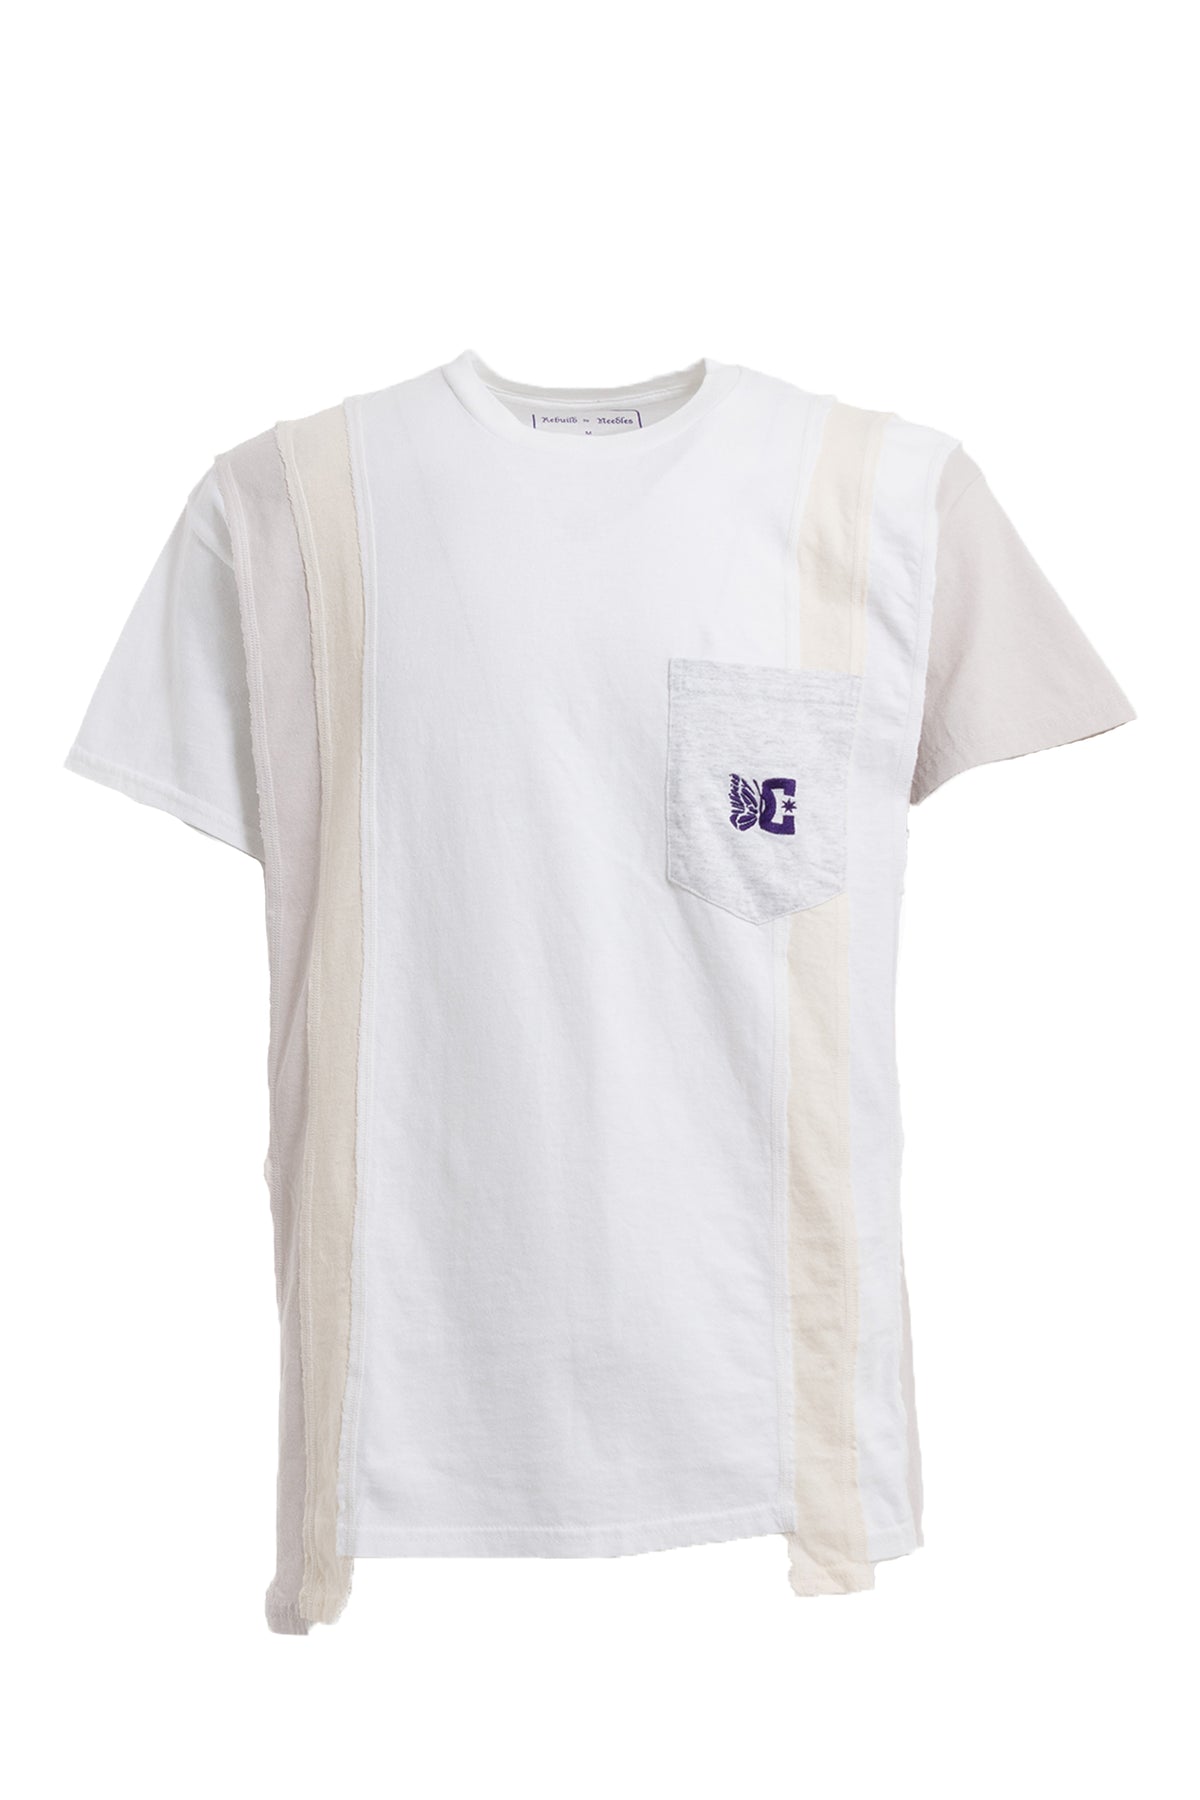 7 CUTS S/S TEE - SOLID / FADE / IVORY / M